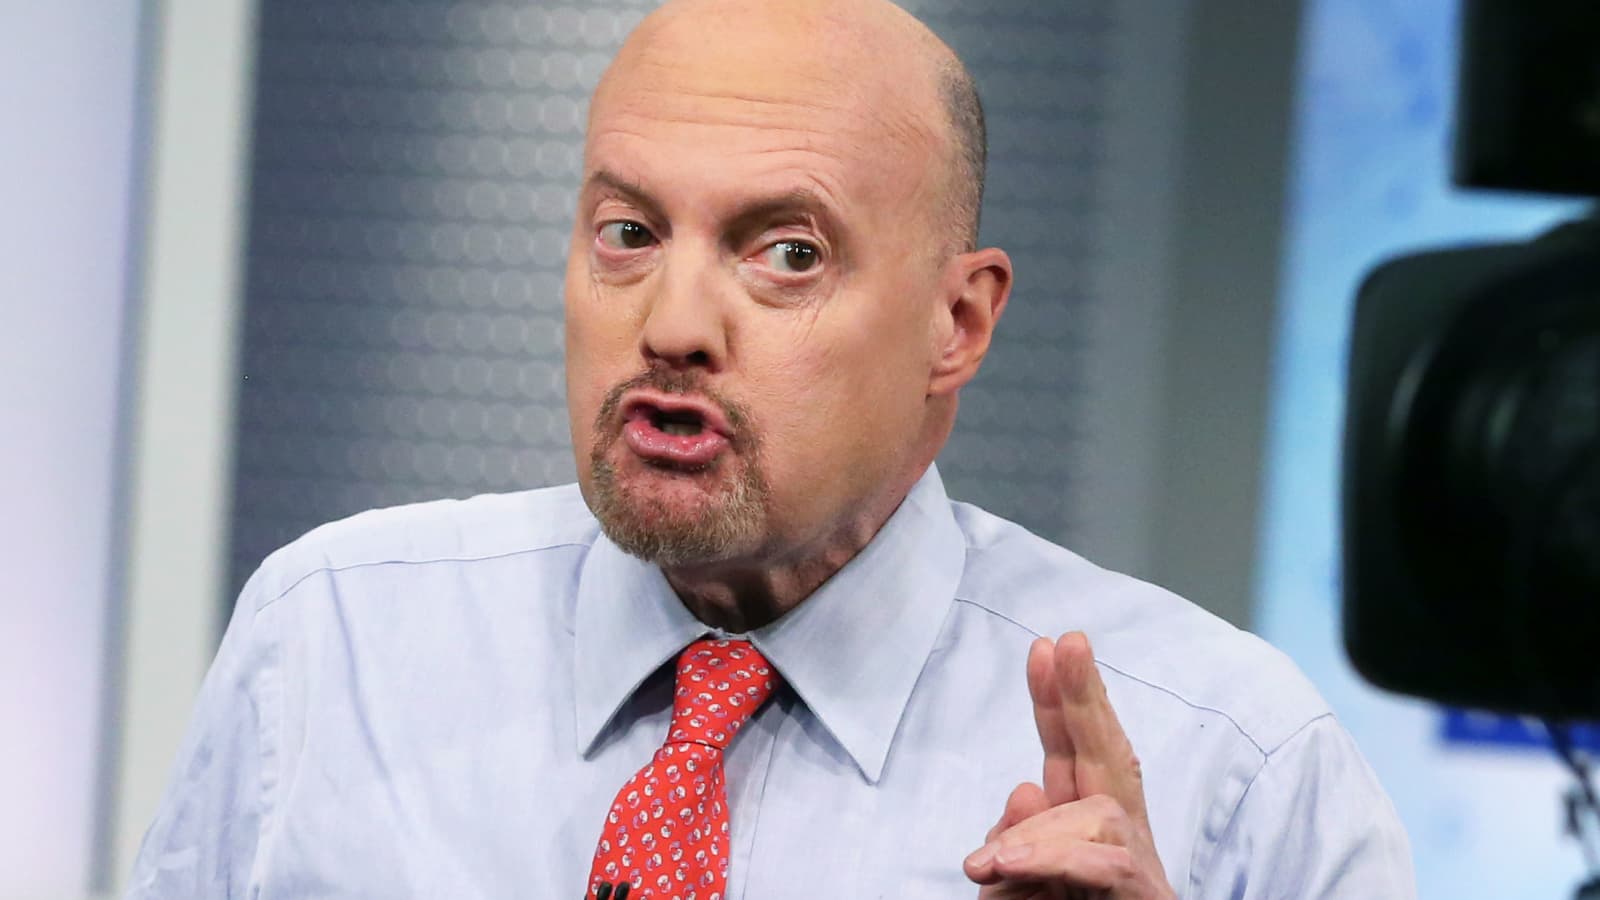 Cramer: Pick individual stocks with long-term growth stories in this 'treacherous' market